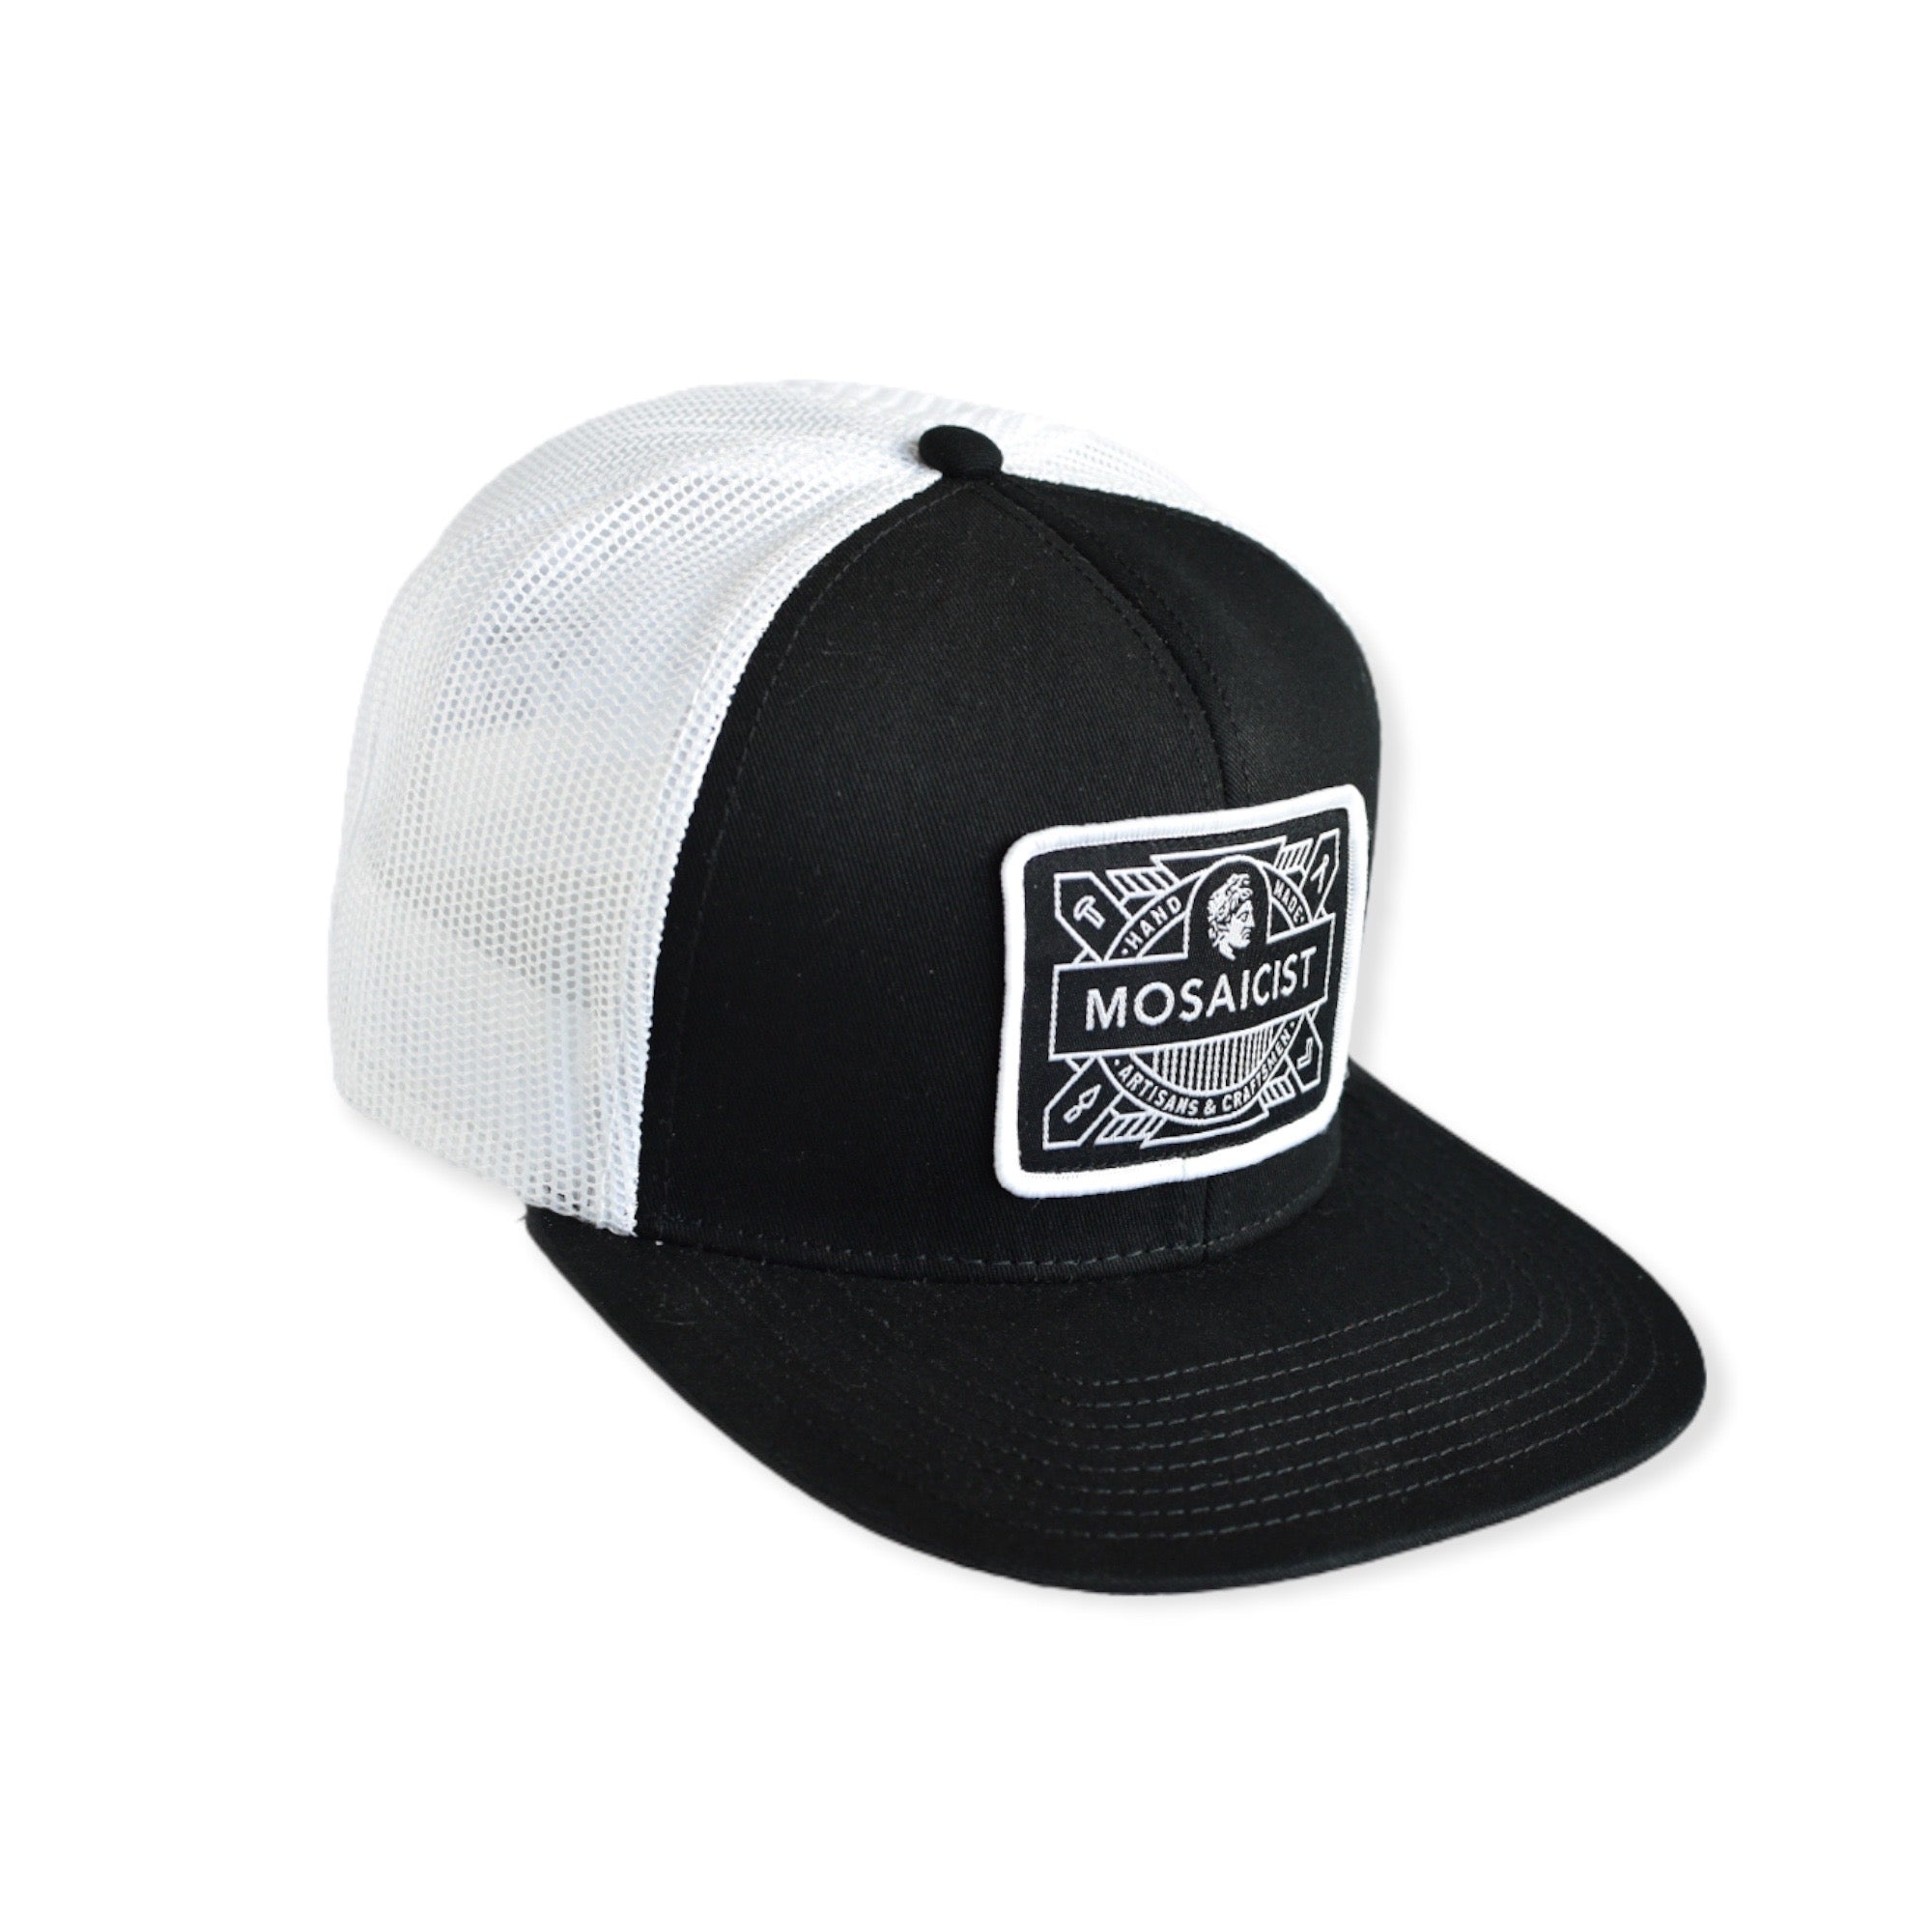 Trucker Hat from Mosaicist - Patch